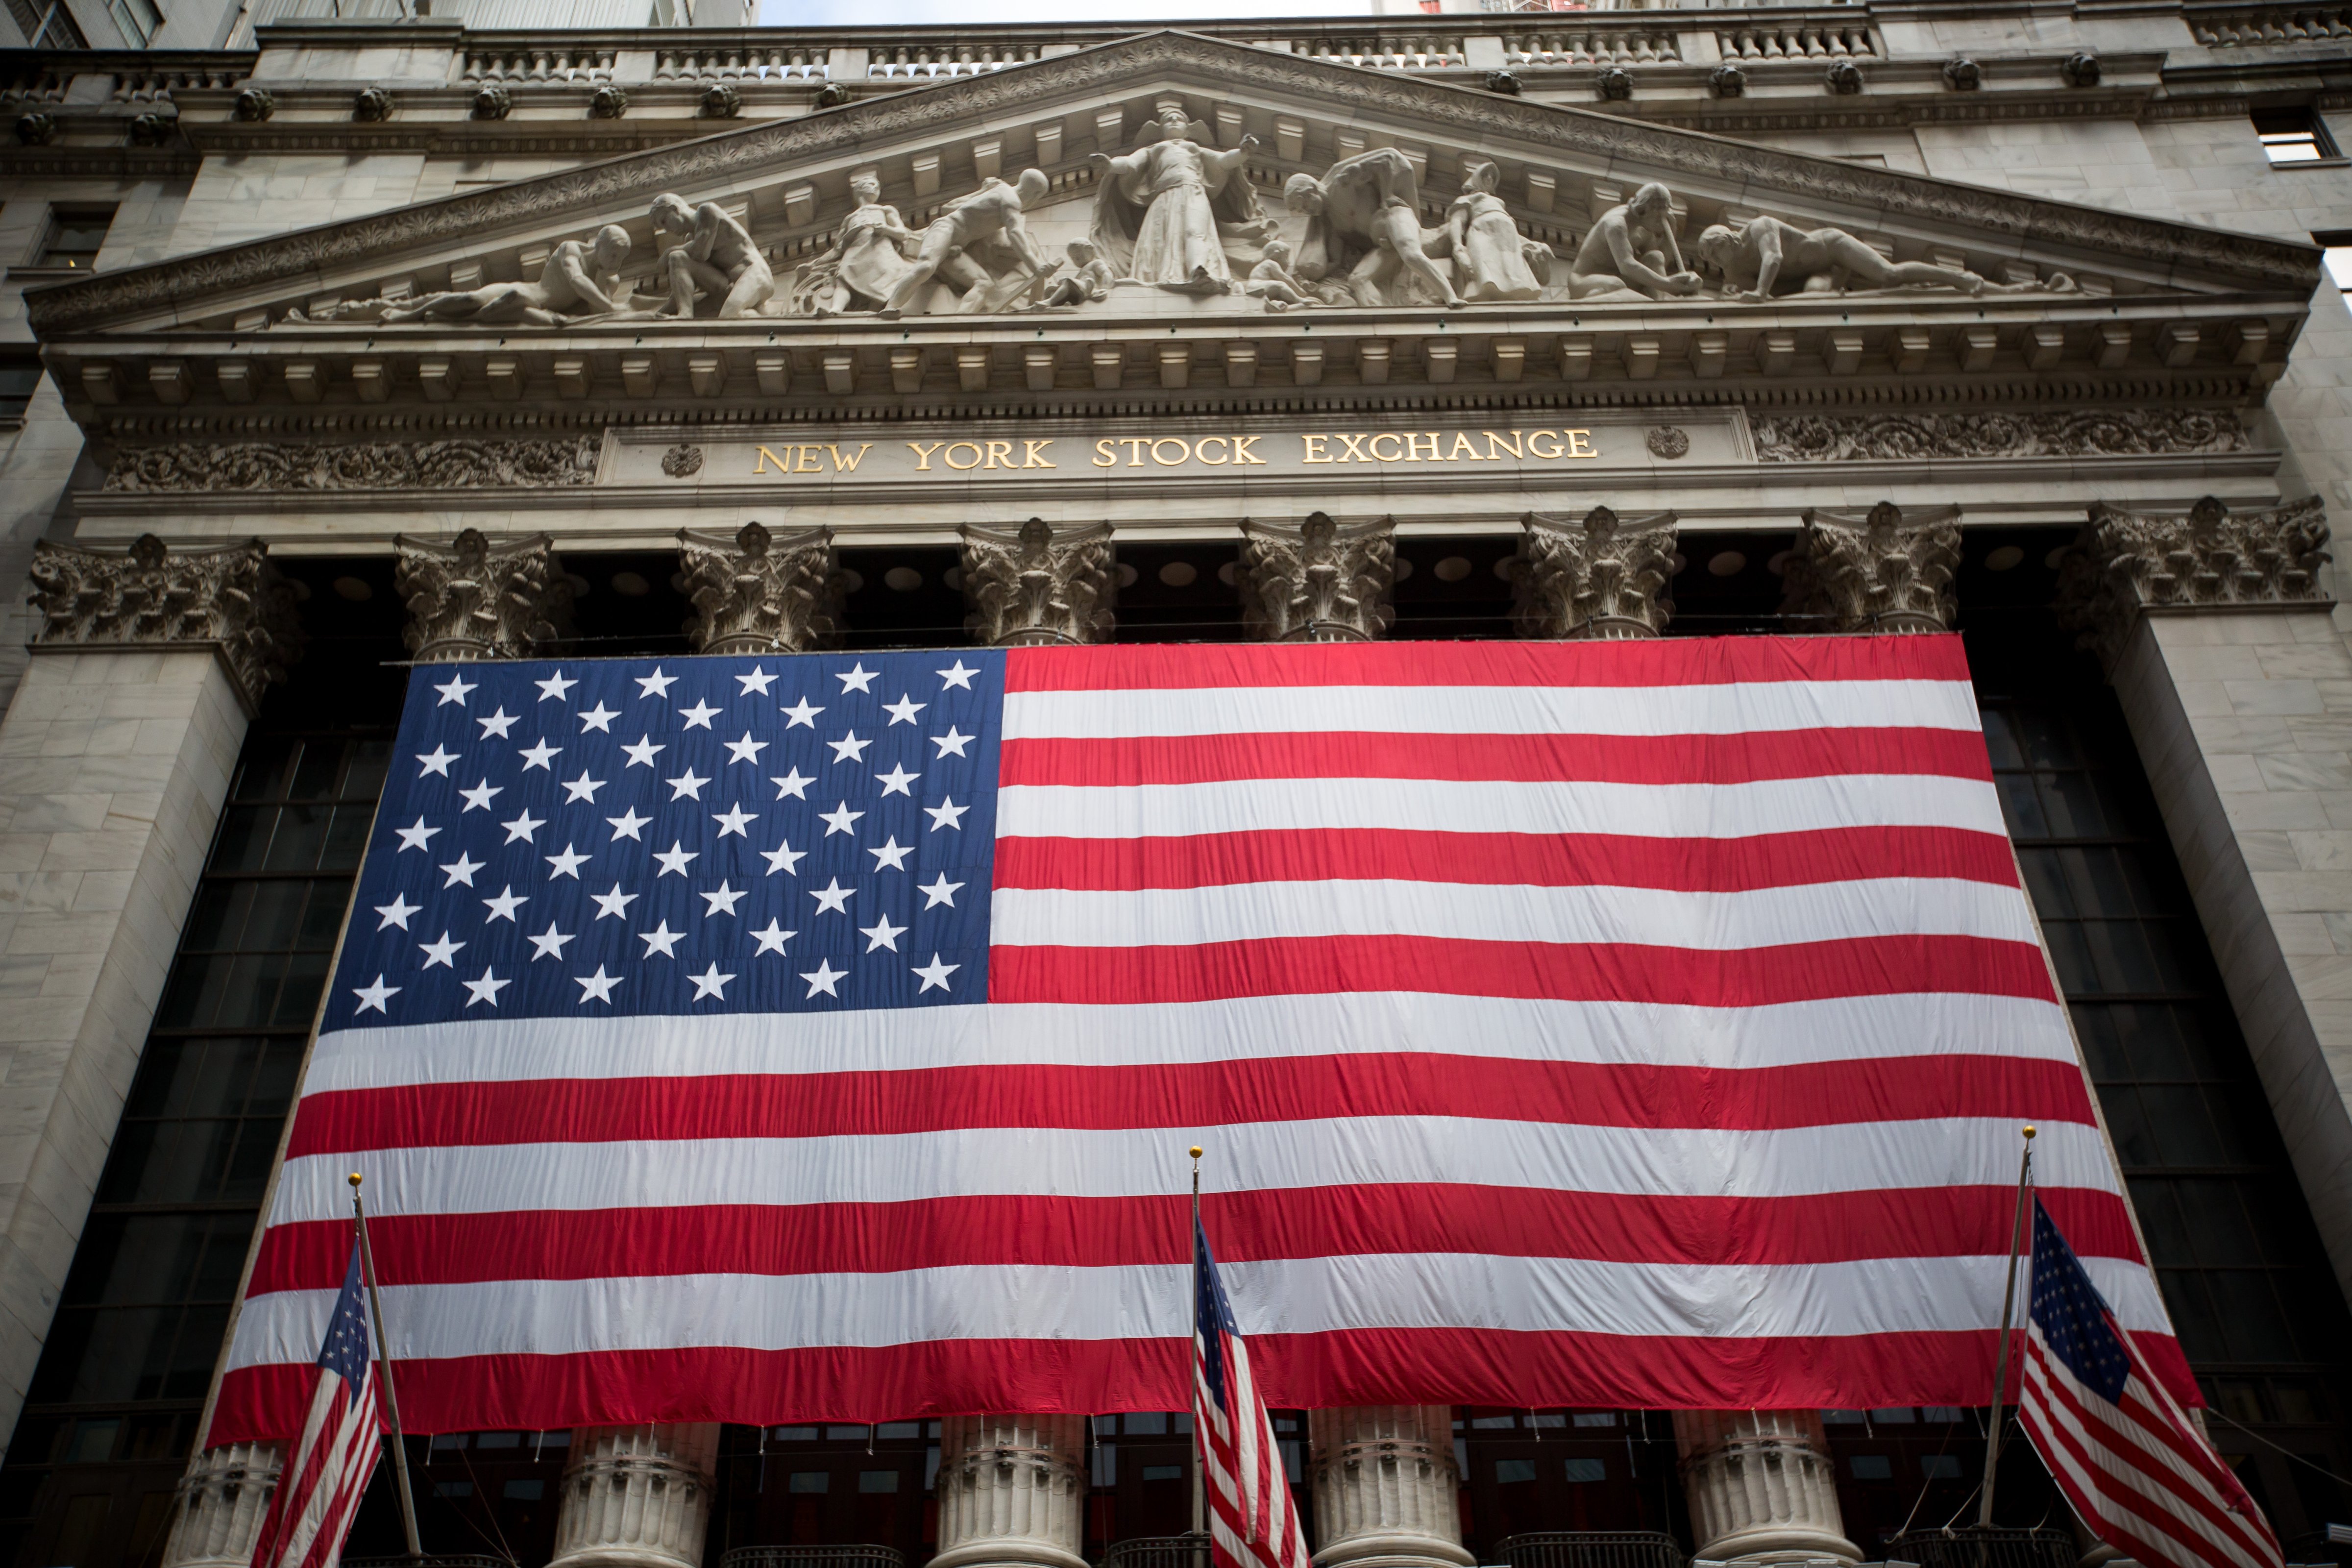 An American flag is displayed outside the New York Stock Exchange (NYSE) stands in New York, U.S., on Tuesday, July 5, 2016. (Michael Nagle—Bloomberg via Getty Images)